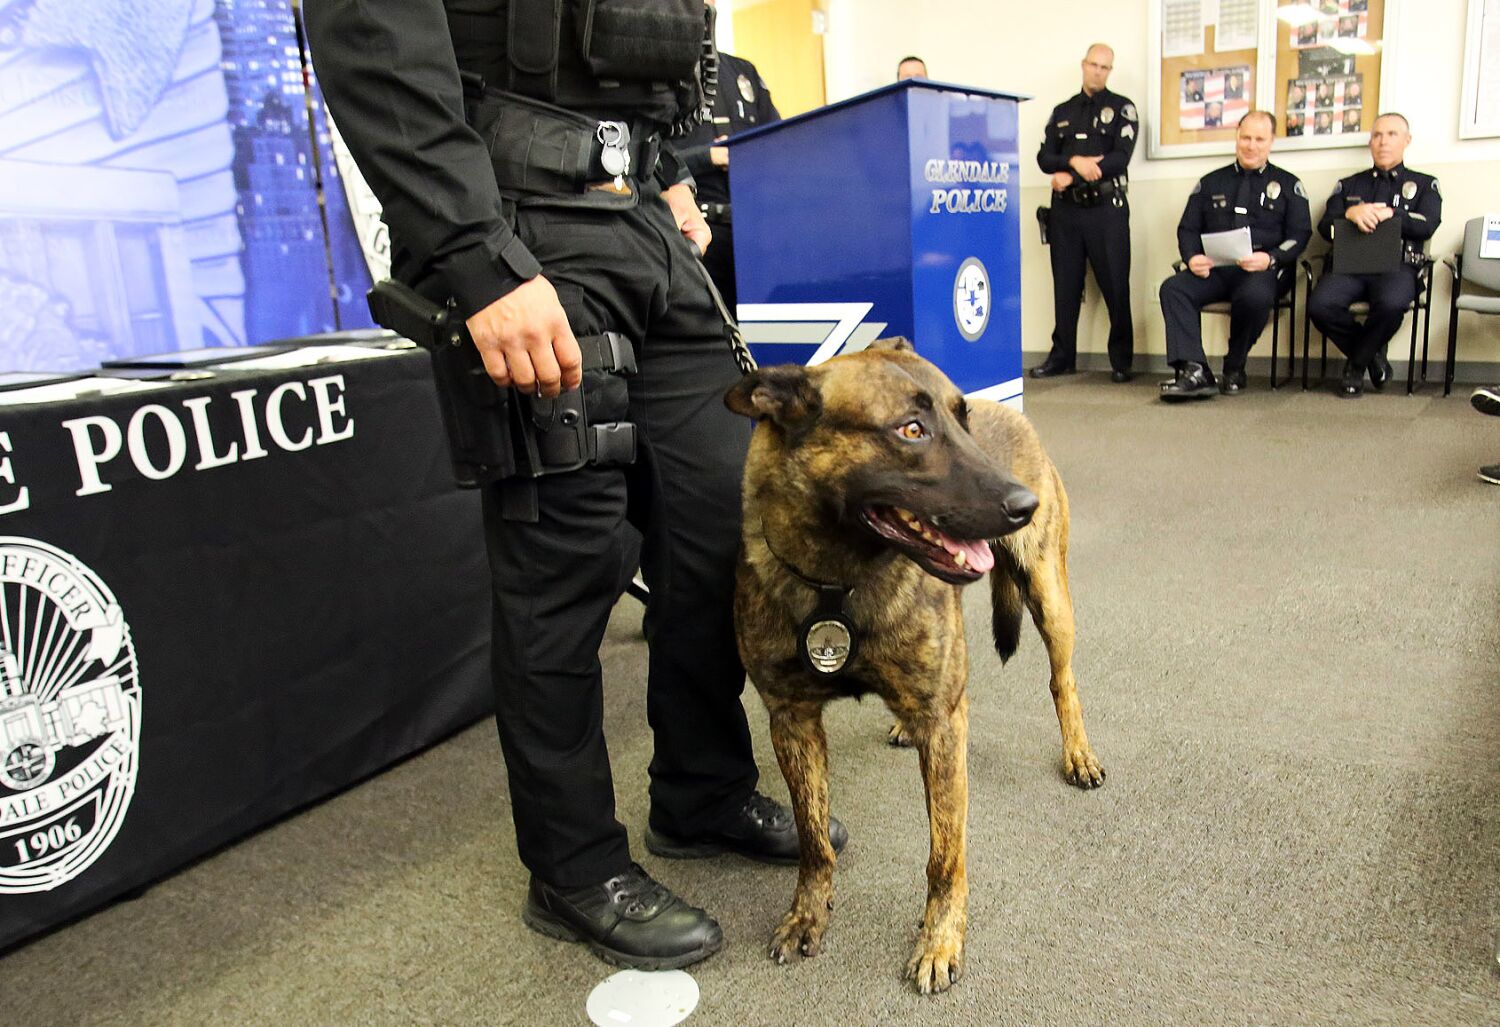 California bill would ban police dogs from arrests and crowd control, citing racial trauma